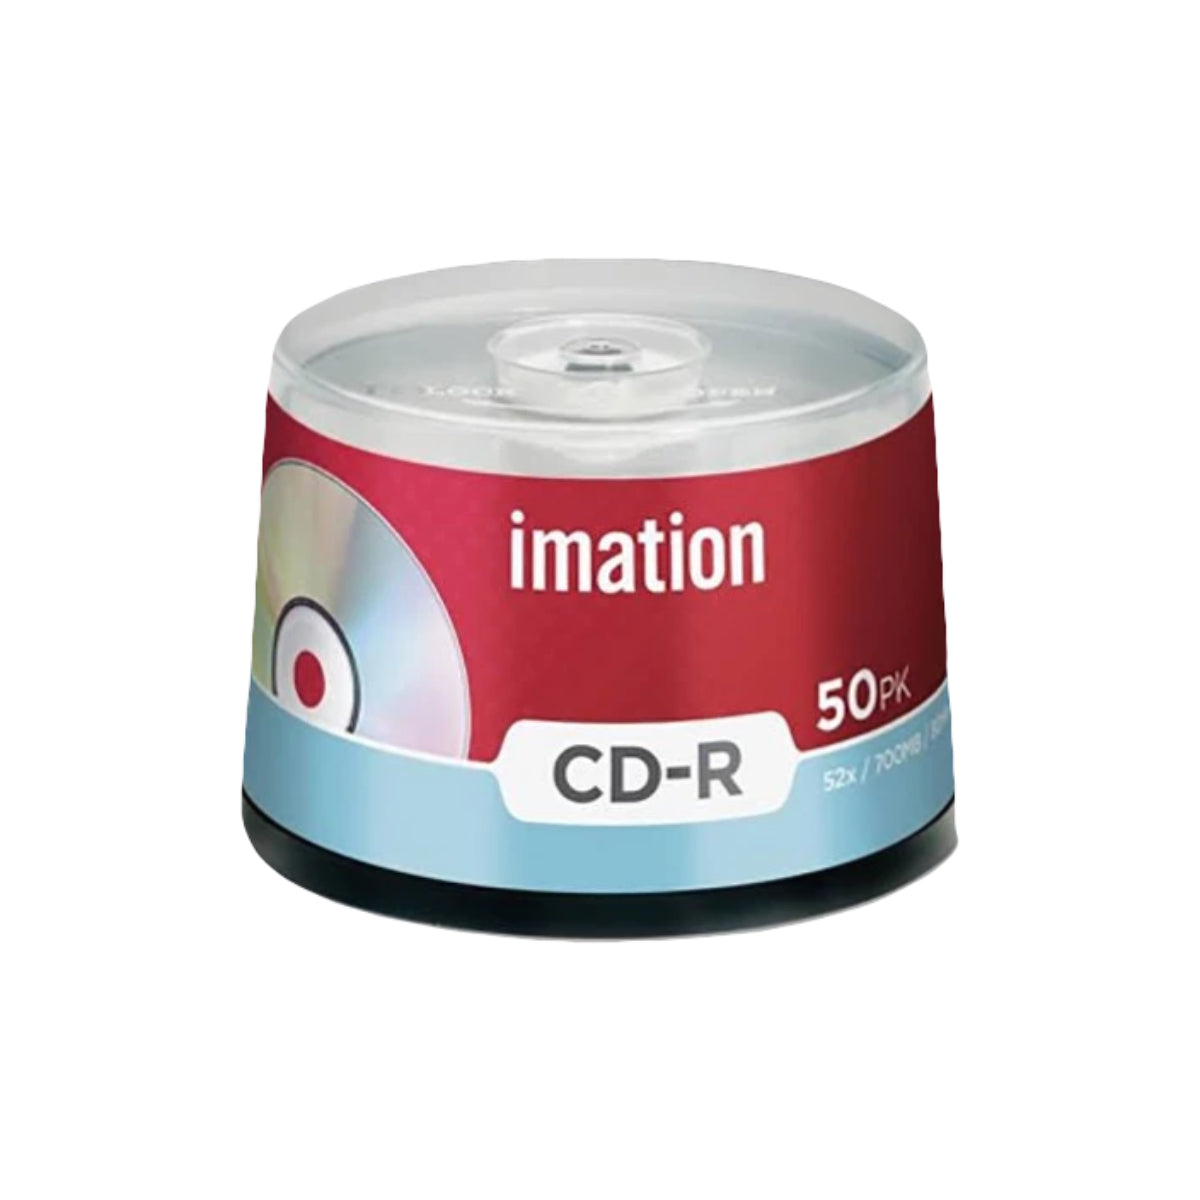 Imation CD-R, 52x / 700MB / 80Min, 50/spindle